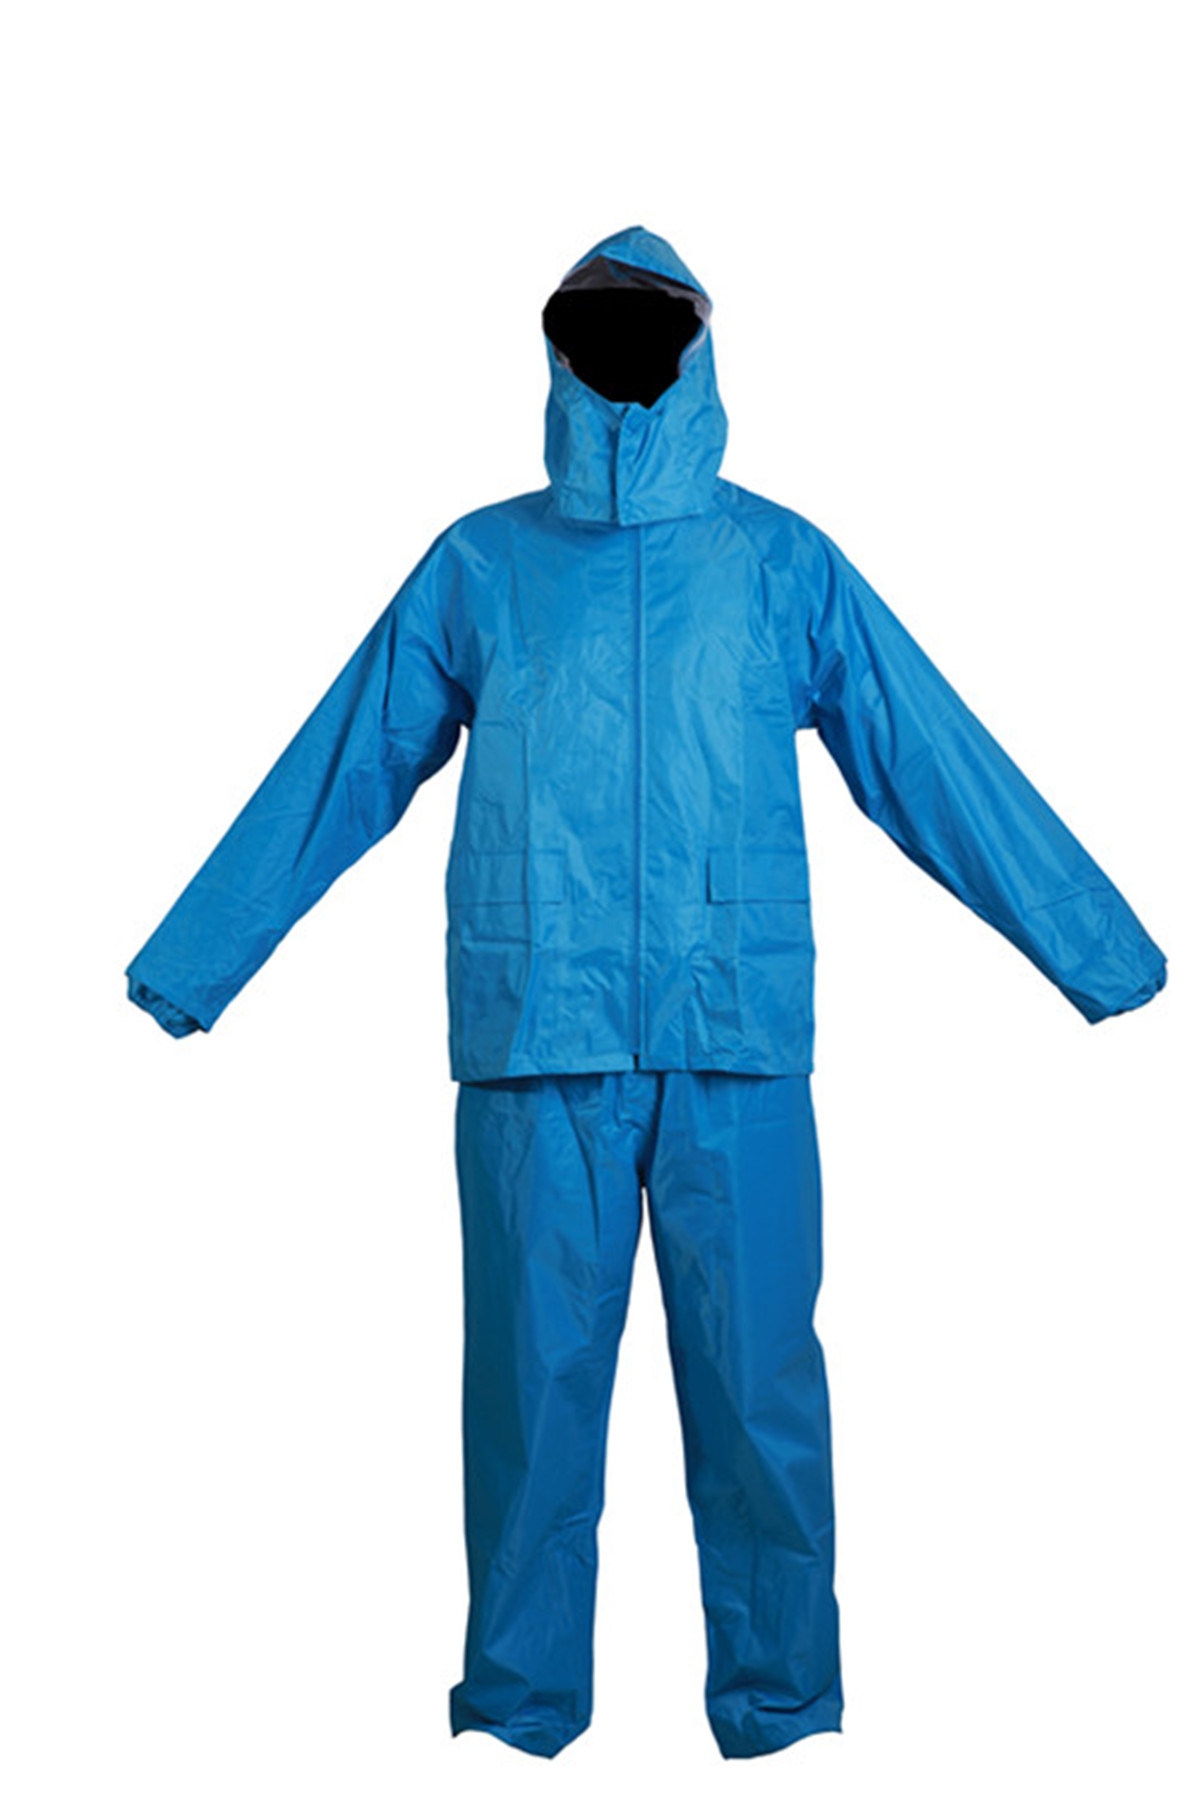 190t Rainsuit Made by Polyester with PVC Coating